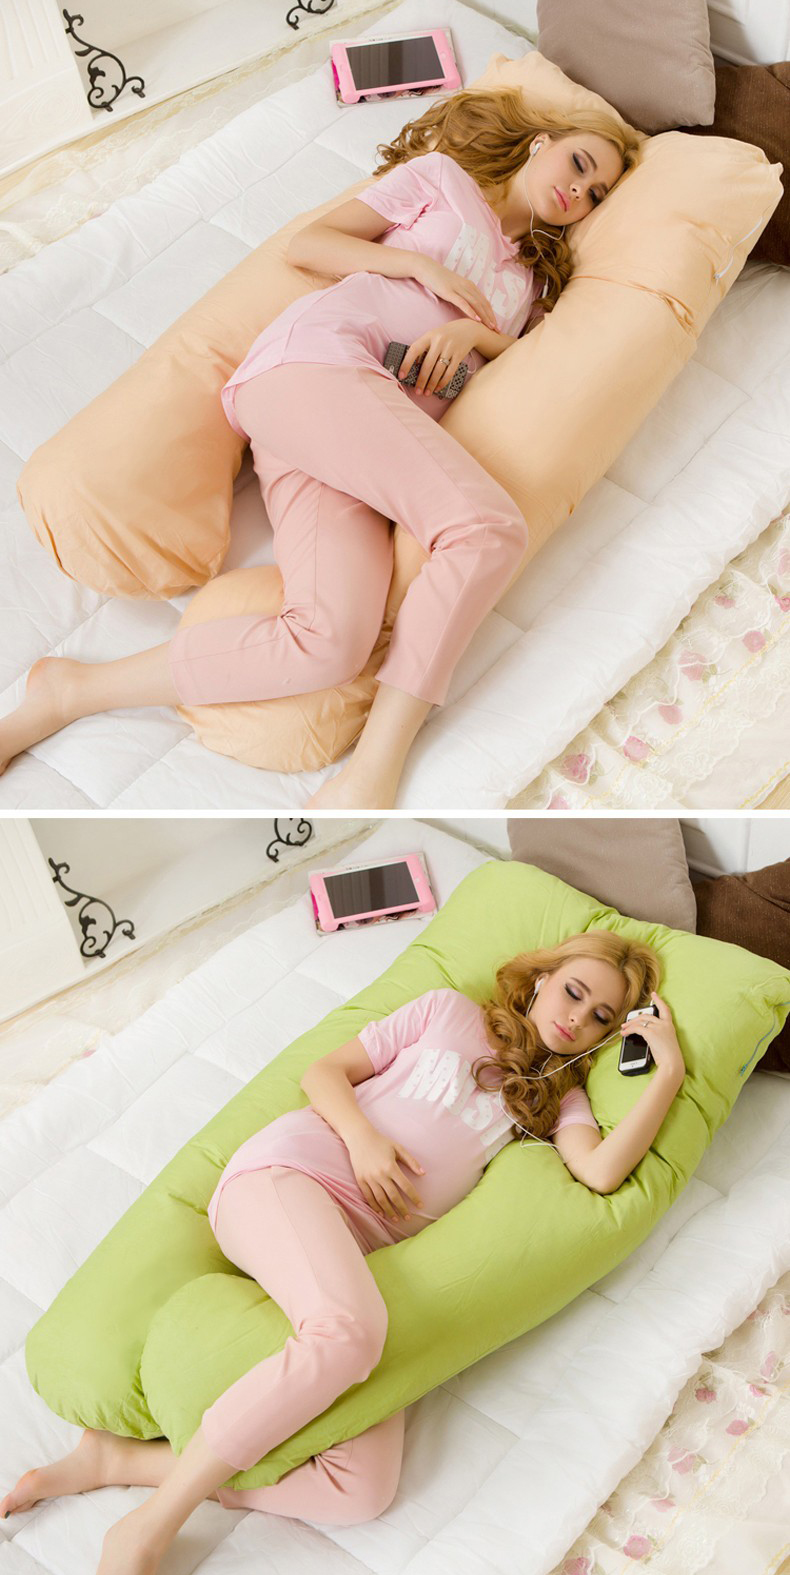 Honana-WX-8396-Comfortable-Pregnancy-U-Tyle-Body-Pillow-Cushion-For-Women-Best-For-Side-Sleepers-Rem-1118708-7